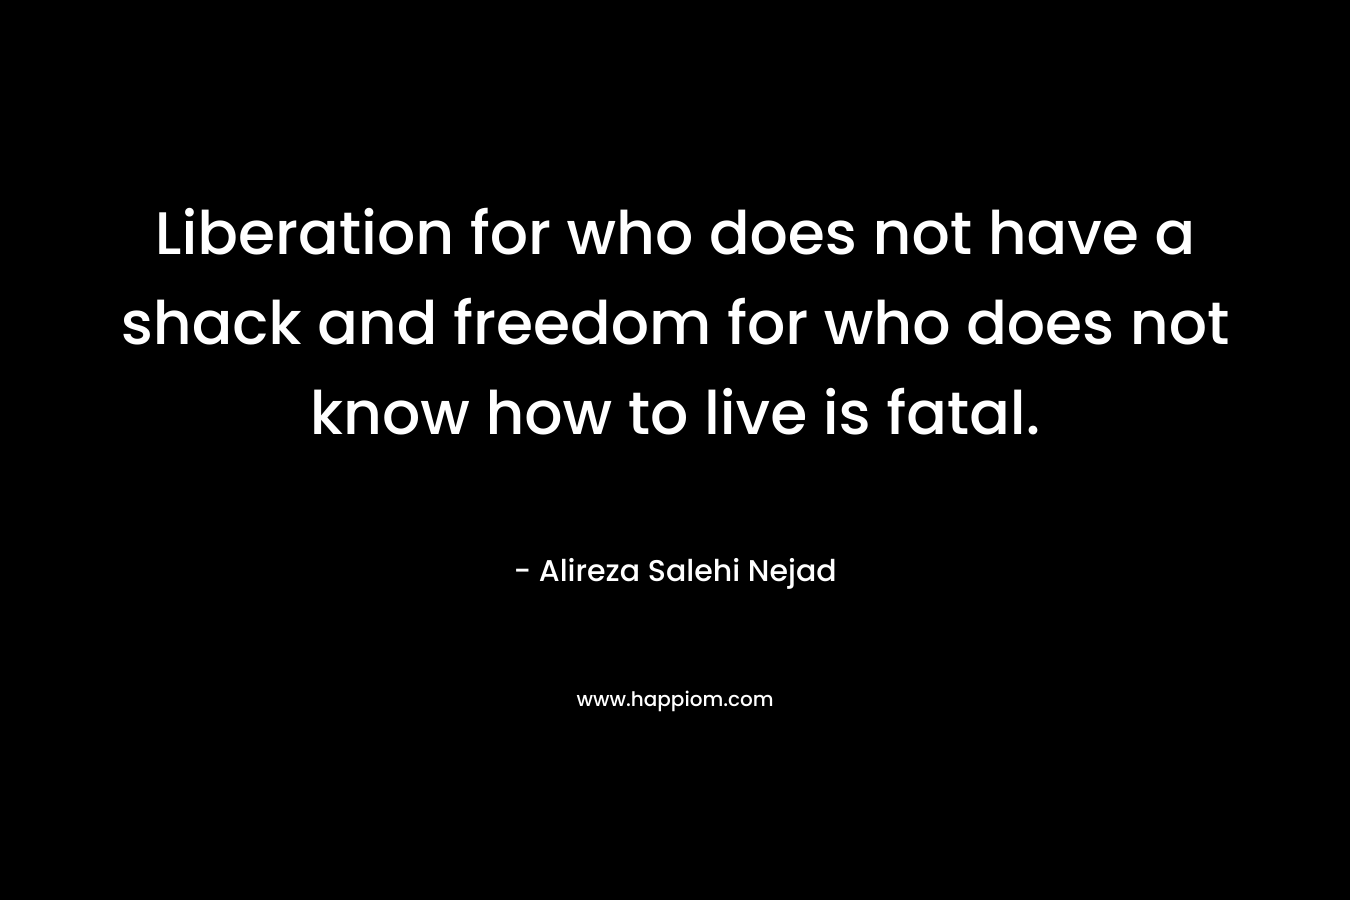 Liberation for who does not have a shack and freedom for who does not know how to live is fatal. – Alireza Salehi Nejad